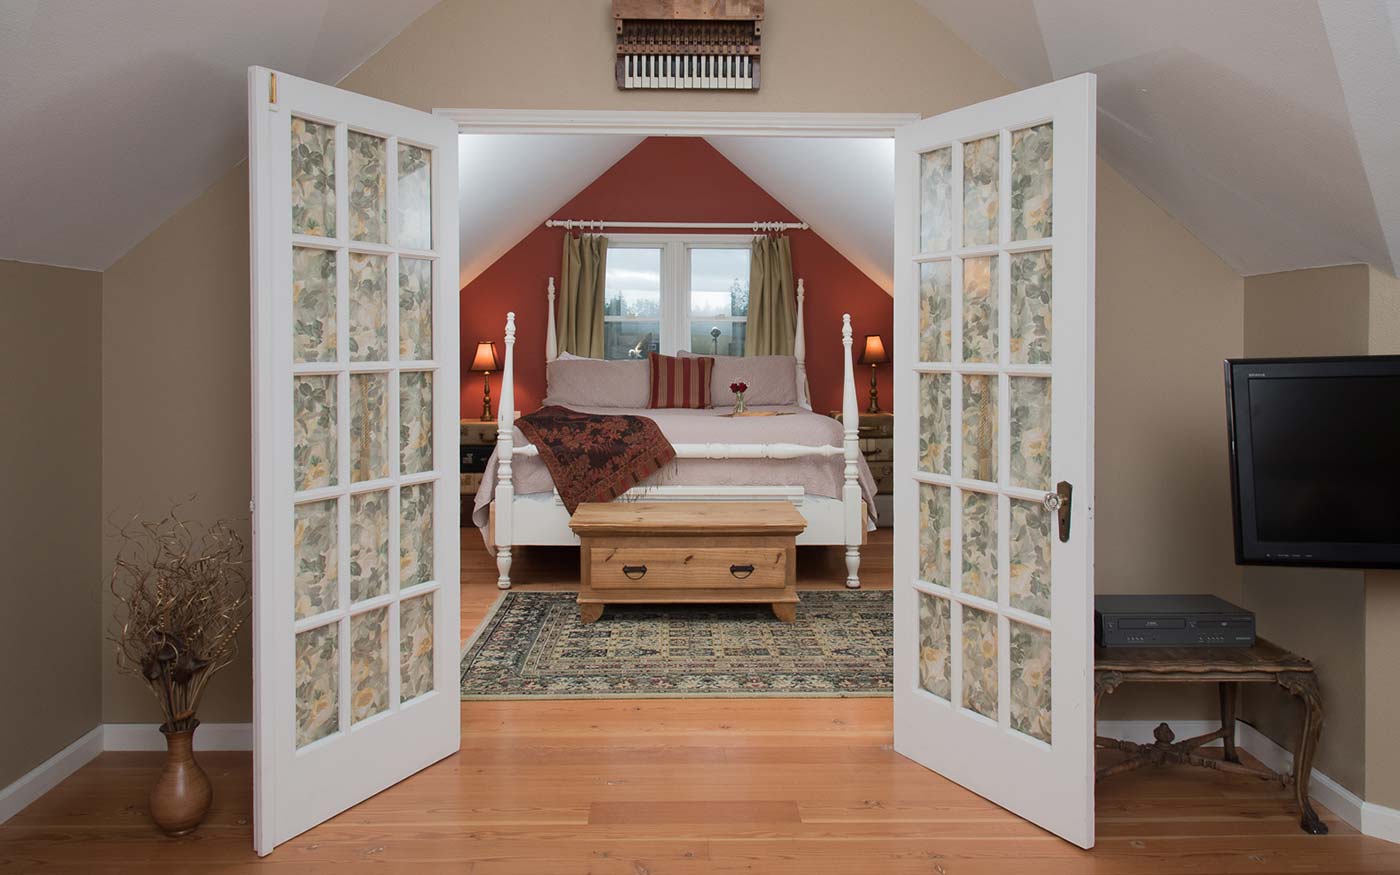 A romantic guest room at our Friday Harbor Hotel, one of the most romantic getaways in Washington